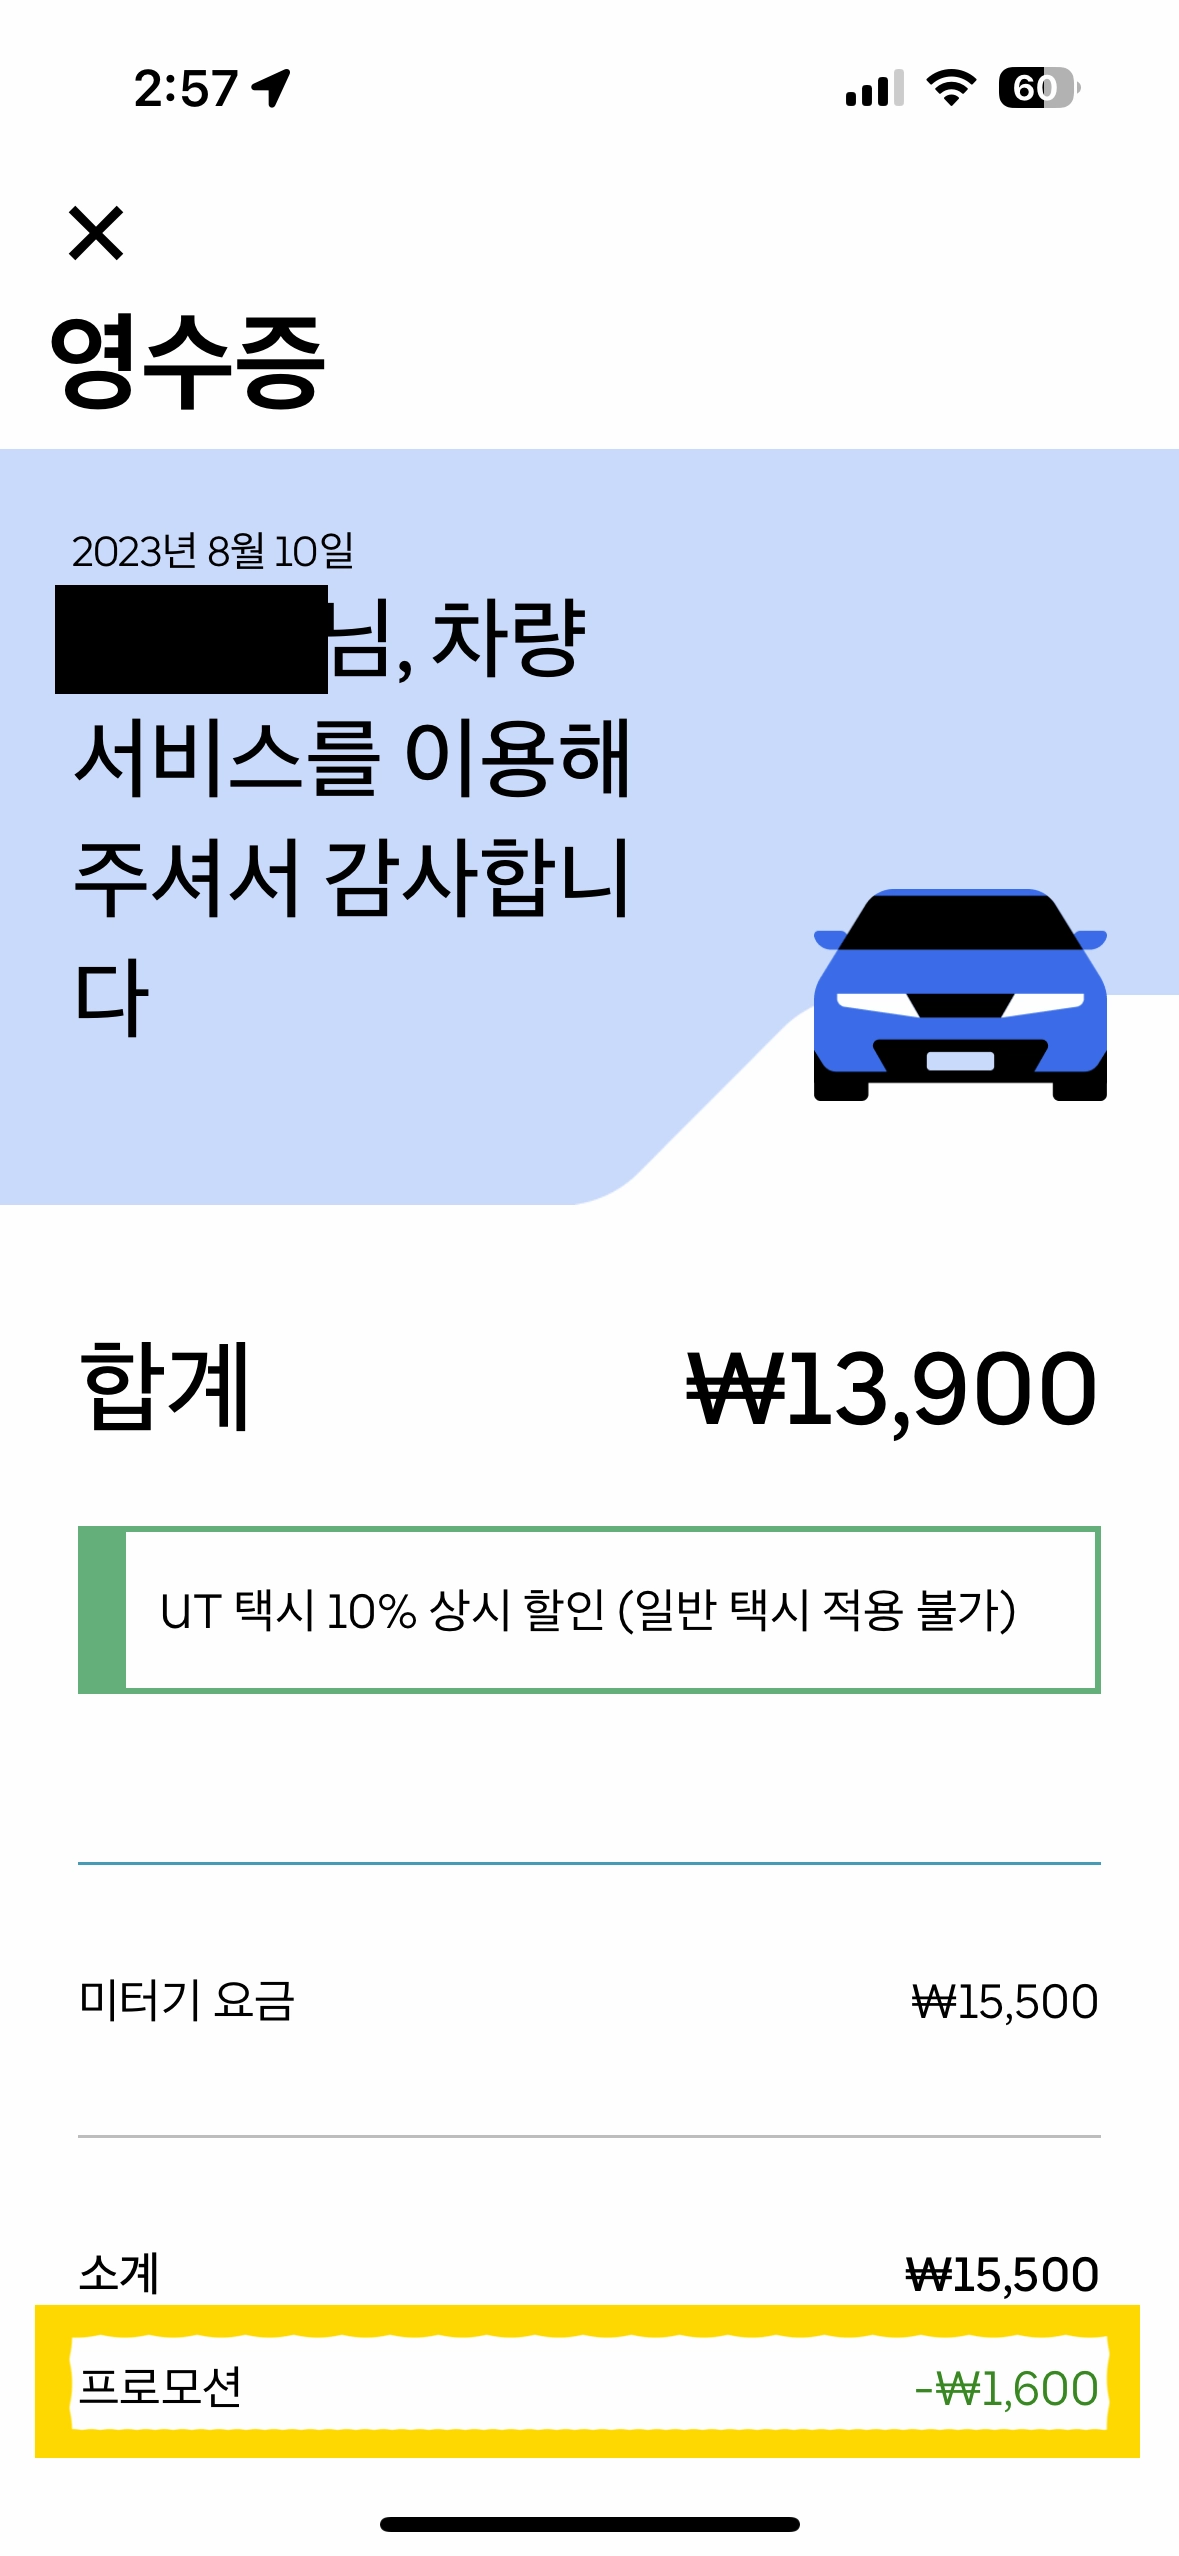 How-to-Use-Uber-Taxis-in-Seoul-Receipt